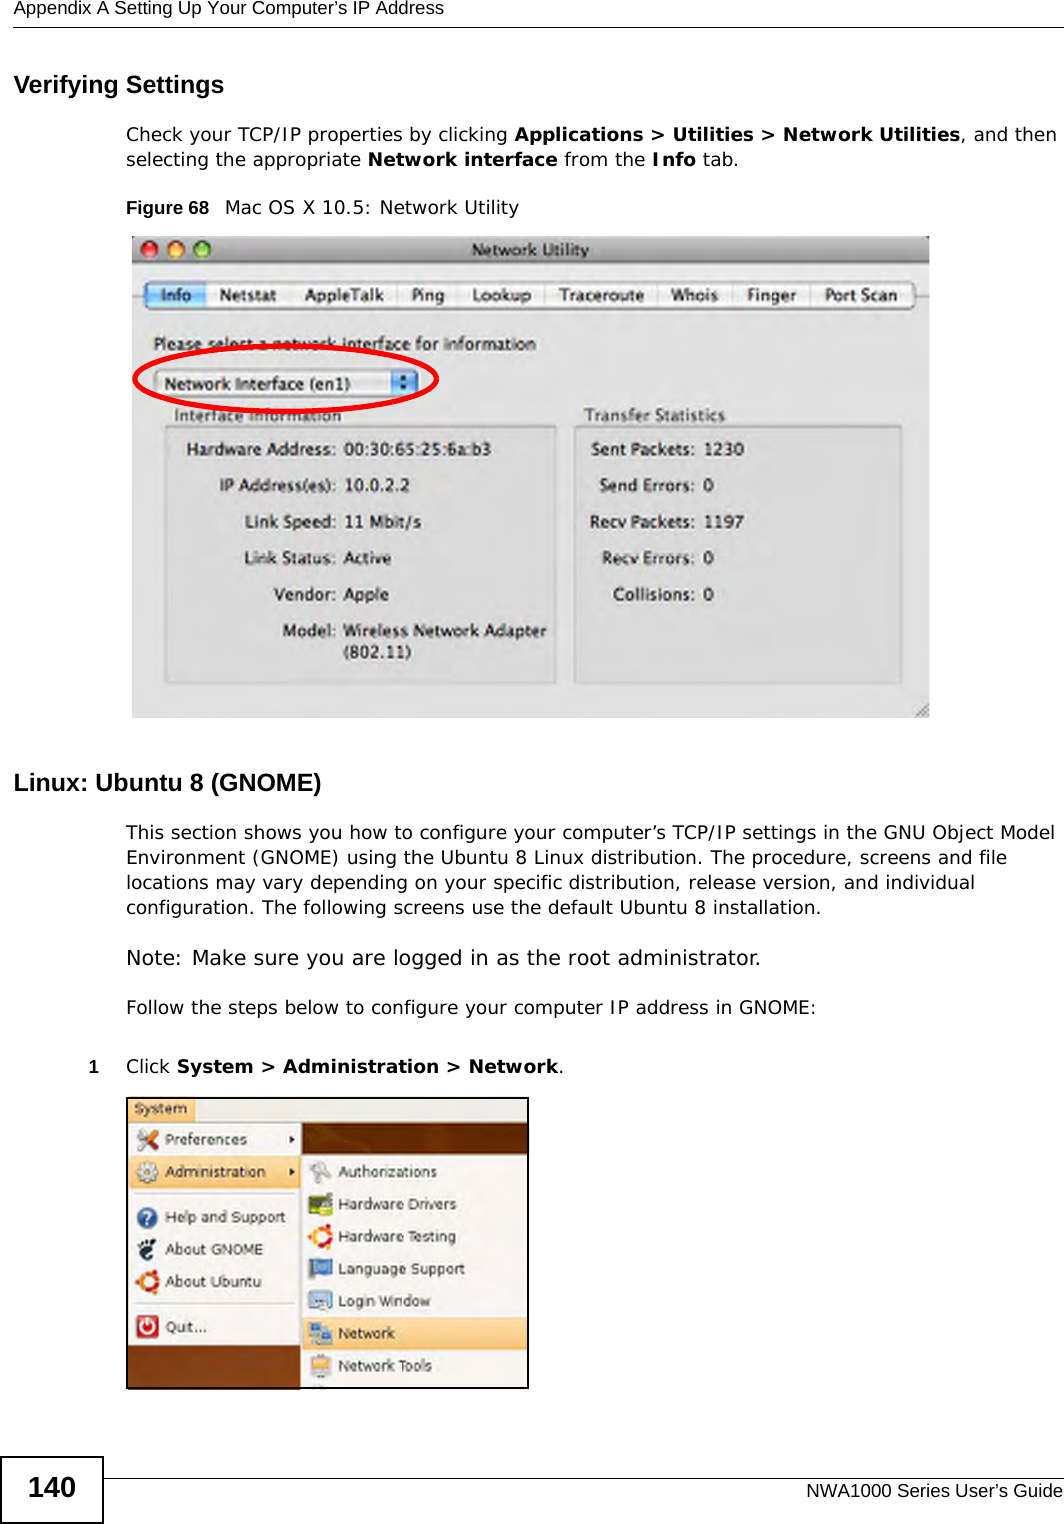 Appendix A Setting Up Your Computer’s IP AddressNWA1000 Series User’s Guide140Verifying SettingsCheck your TCP/IP properties by clicking Applications &gt; Utilities &gt; Network Utilities, and then selecting the appropriate Network interface from the Info tab.Figure 68   Mac OS X 10.5: Network UtilityLinux: Ubuntu 8 (GNOME)This section shows you how to configure your computer’s TCP/IP settings in the GNU Object Model Environment (GNOME) using the Ubuntu 8 Linux distribution. The procedure, screens and file locations may vary depending on your specific distribution, release version, and individual configuration. The following screens use the default Ubuntu 8 installation.Note: Make sure you are logged in as the root administrator. Follow the steps below to configure your computer IP address in GNOME: 1Click System &gt; Administration &gt; Network.